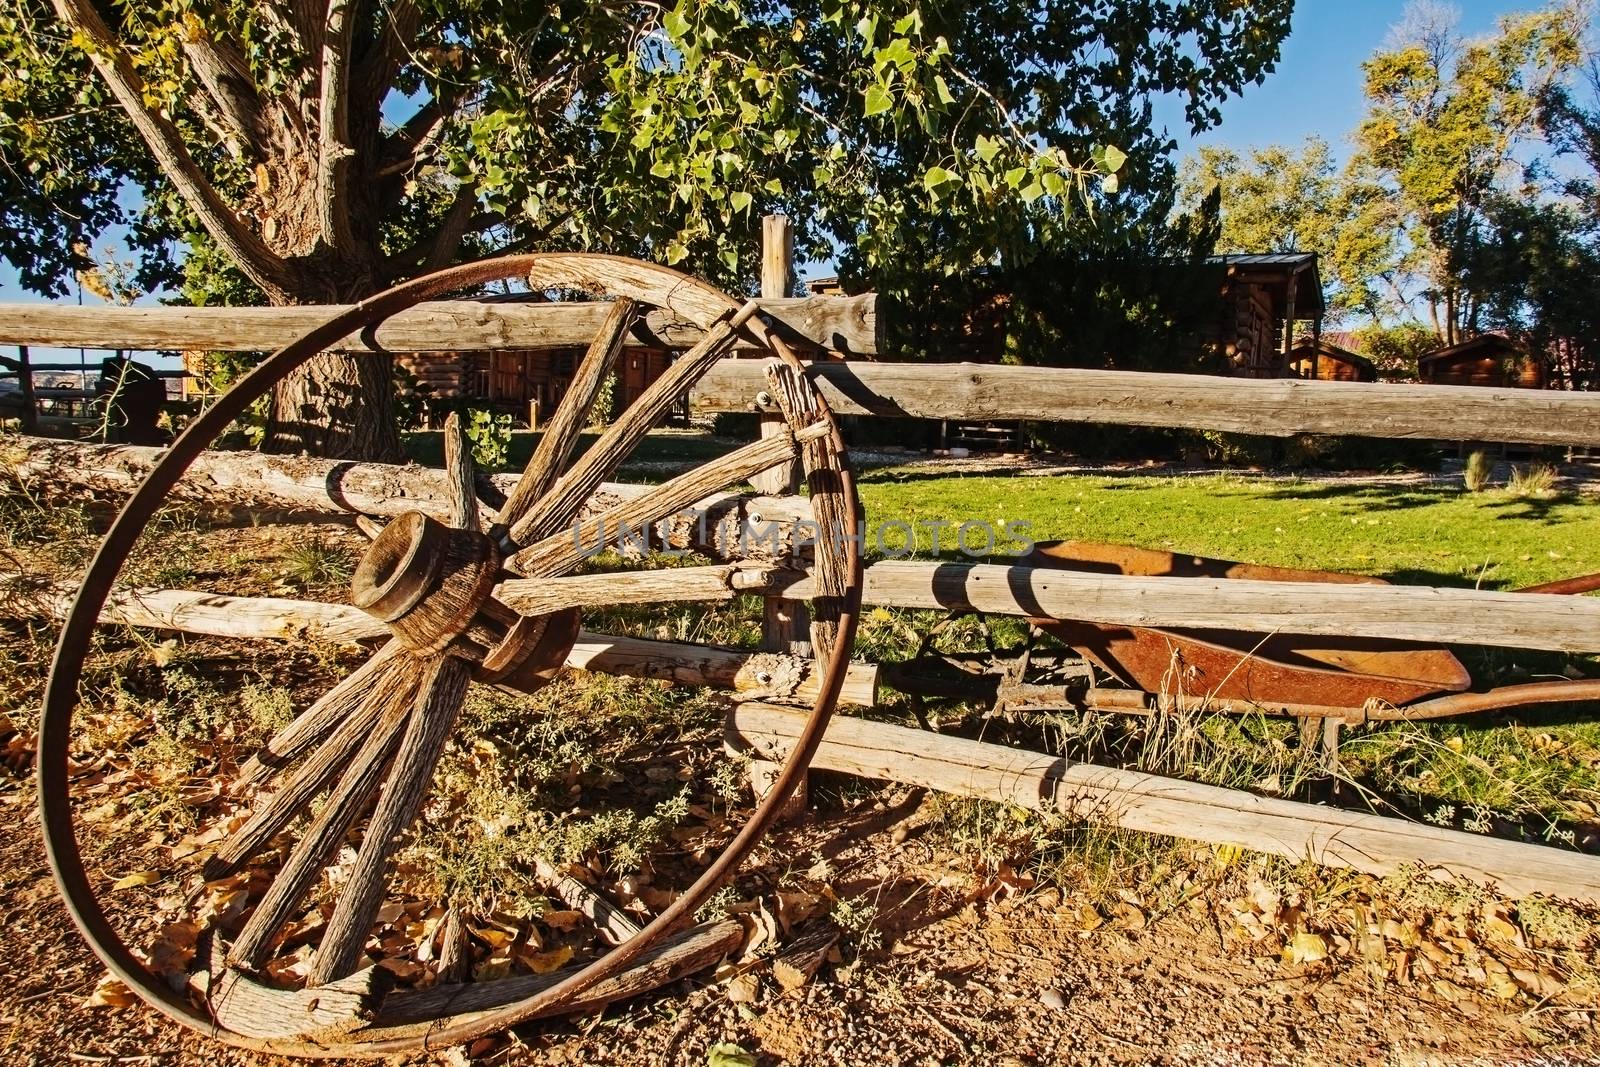 Wagon Wheel against wooden fence by kobus_peche